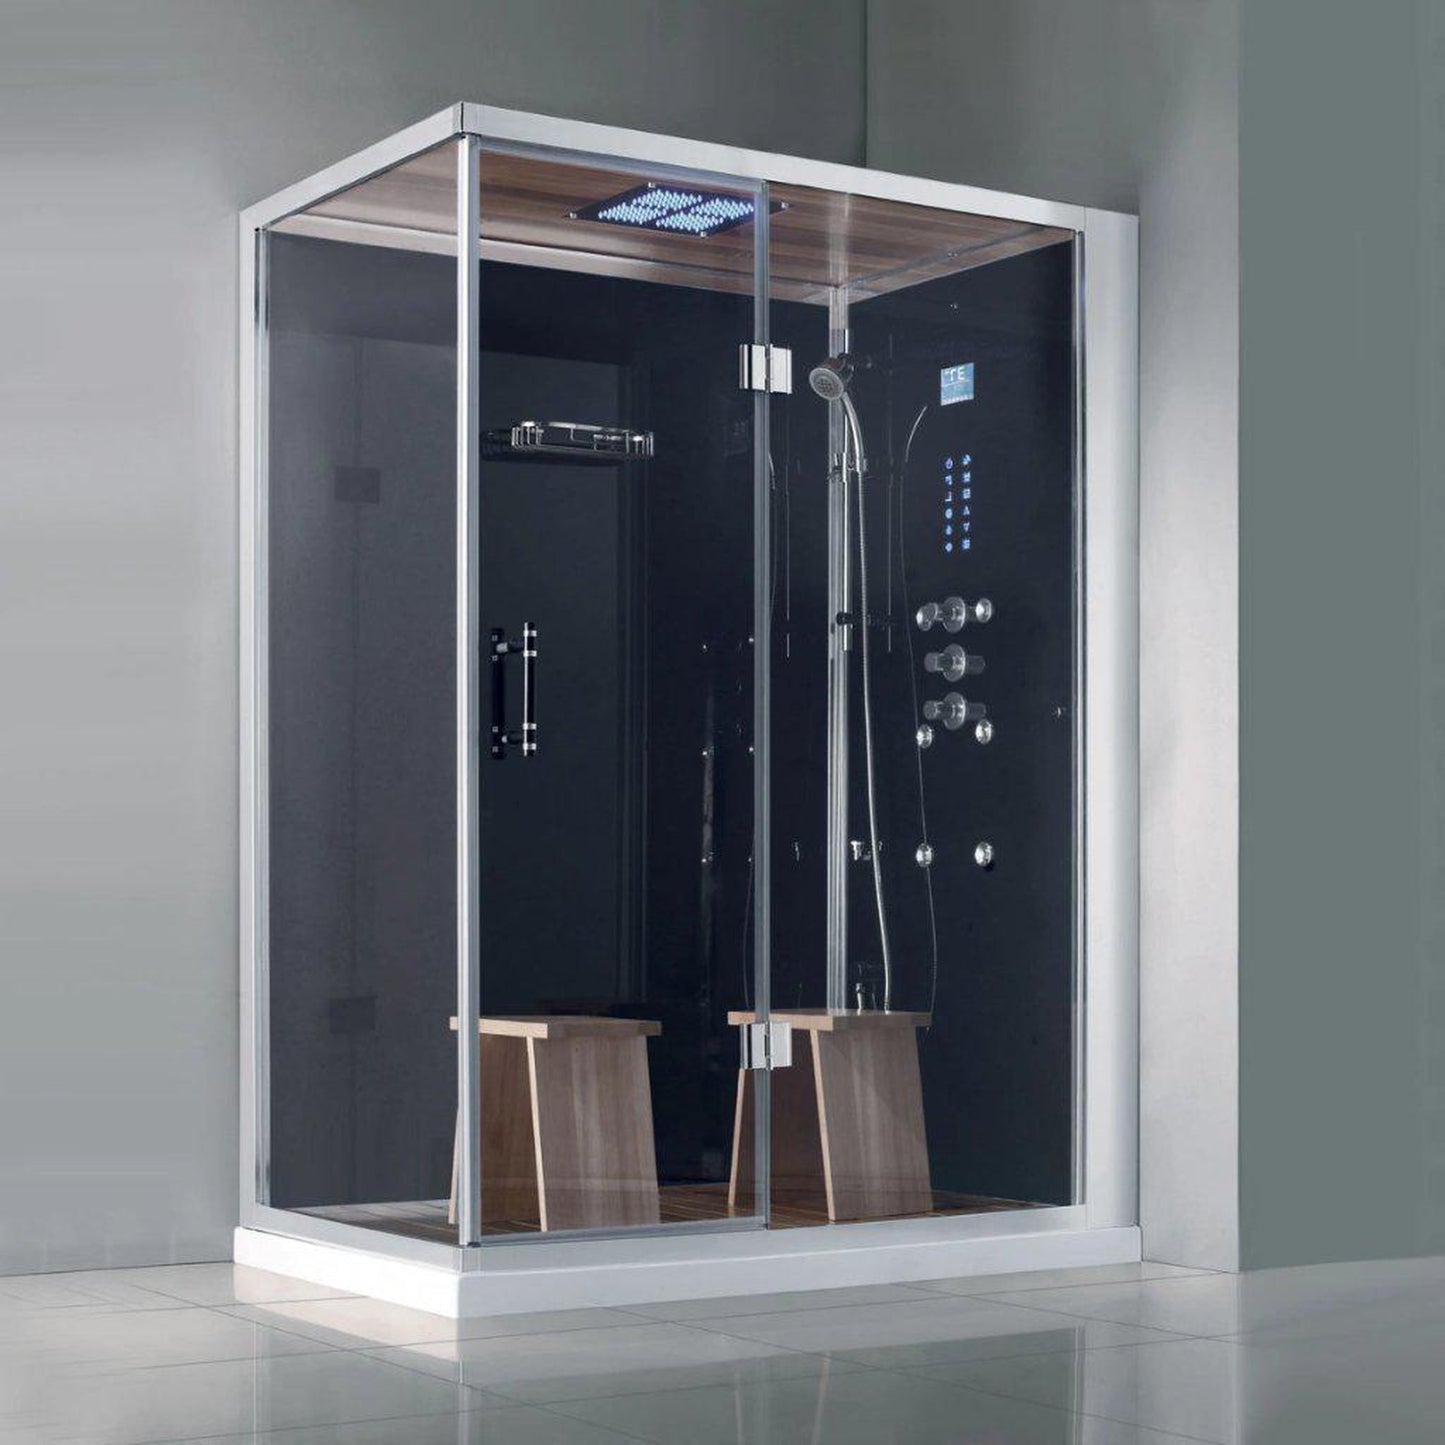 Athena 59" x 36" x 89" Two Person Framed Rectangle Right Handed Black Colored Steam Shower With Hinged Door & 12 Massage Jets